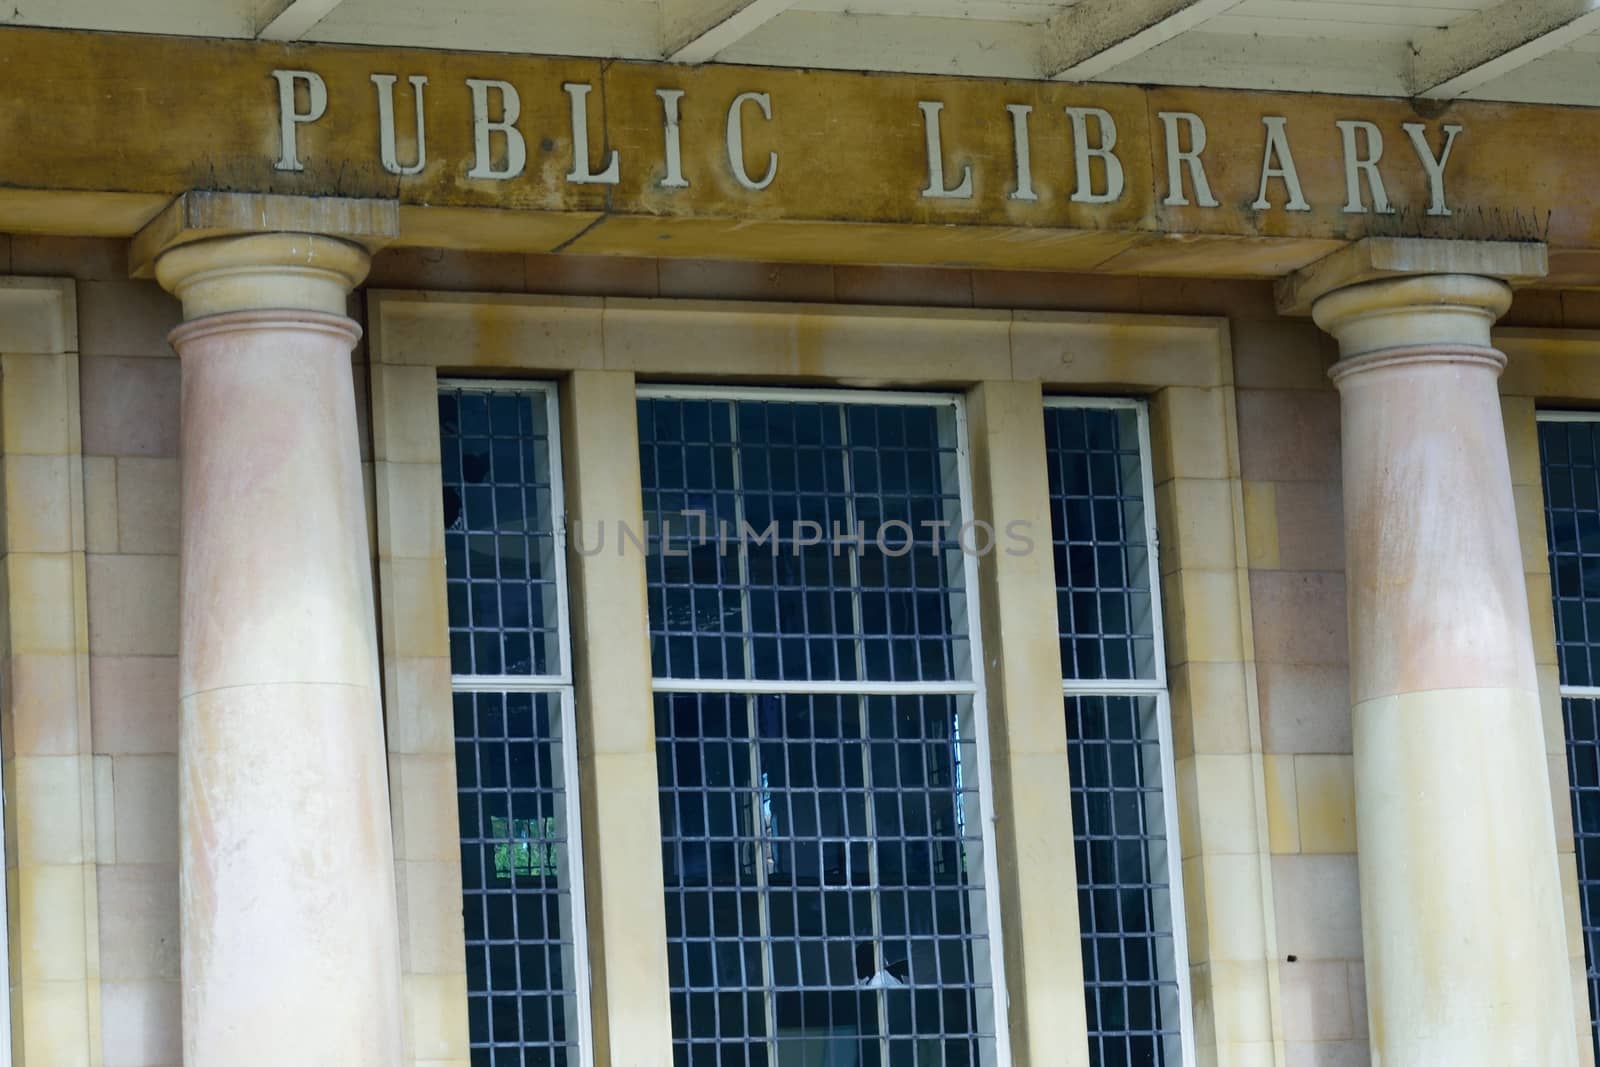 Public Library sign with pillars